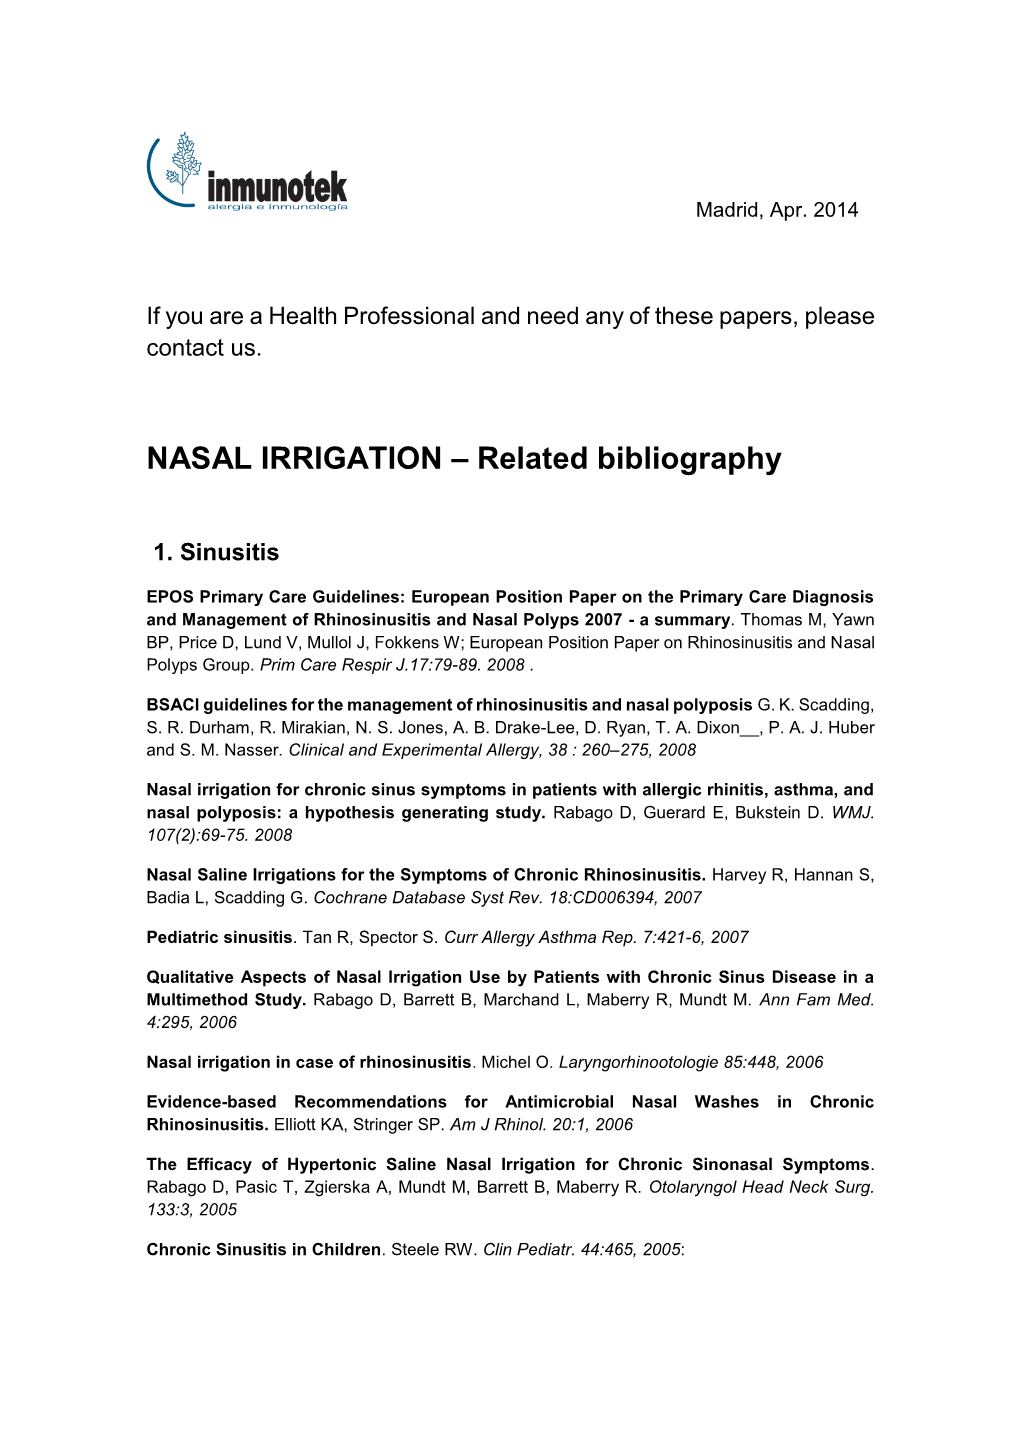 NASAL IRRIGATION – Related Bibliography